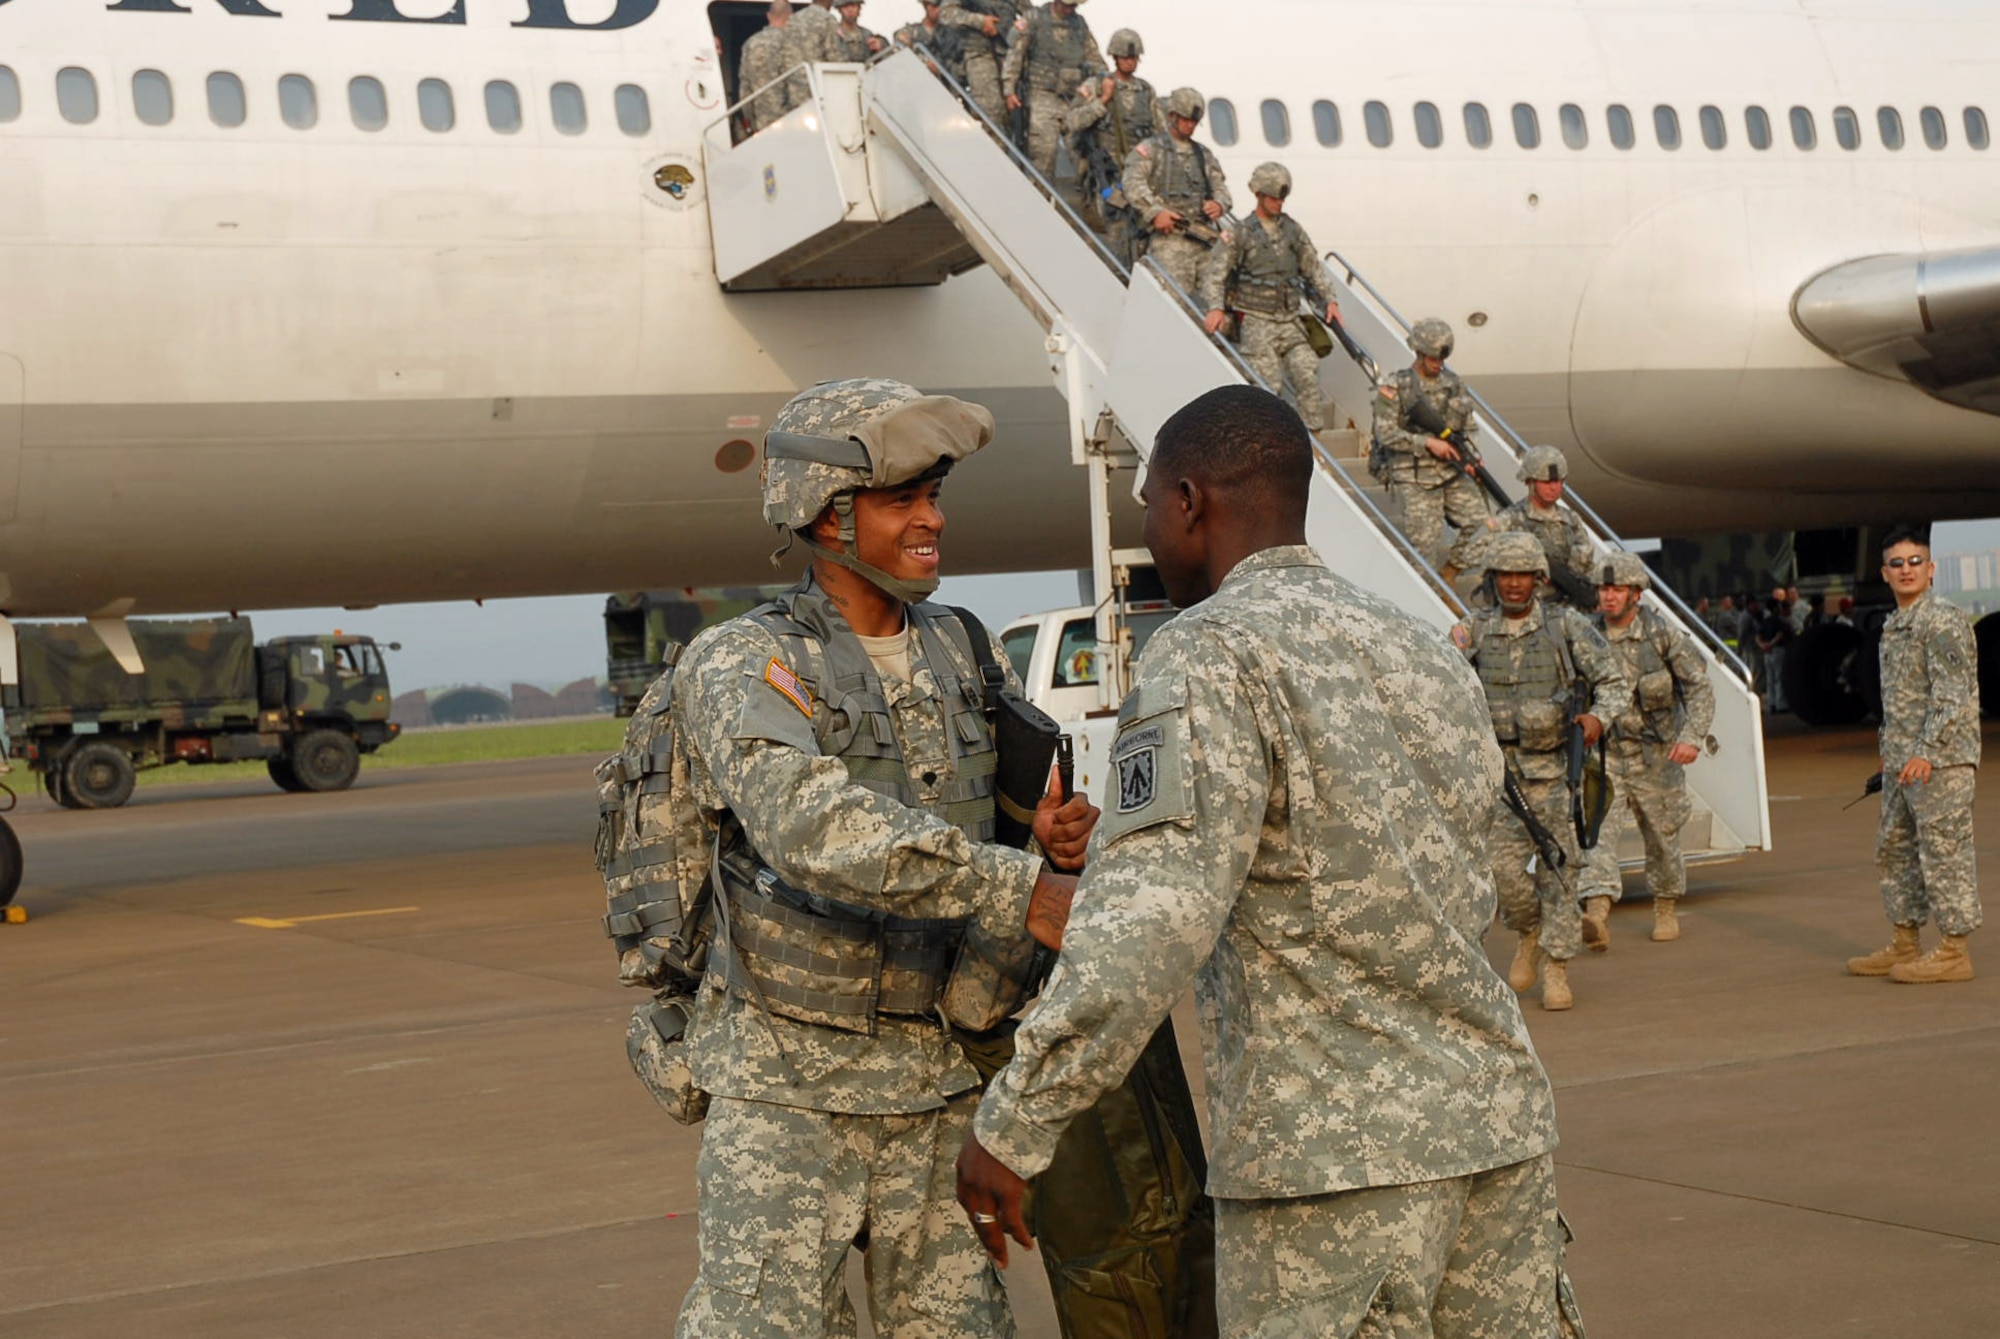 SUWON AIR BASE, Republic of Korea --  A soldier with 1st Battalion, 7th Air Defense Artillery, 108th ADA Brigade is greeted moments after setting foot on Korean soil by a fellow soldier from his battalion who arrived a week prior. (U.S. Army photo by Pfc. Gretchen N. Goodrich)